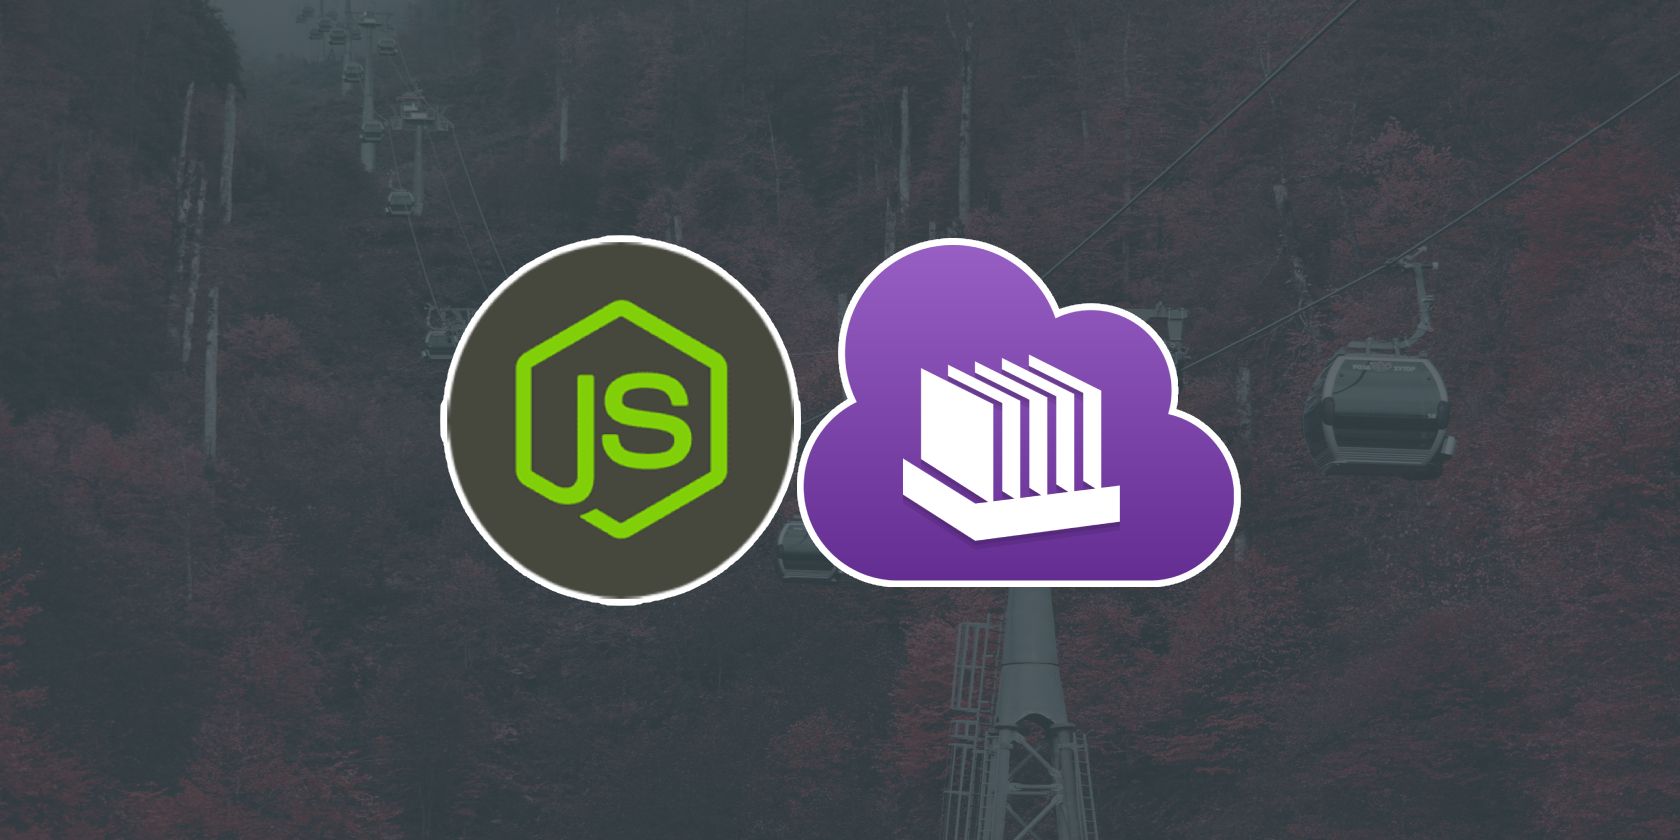 A Node JS icon alongside an icon showing a tray of vertical cards to represent a queue.